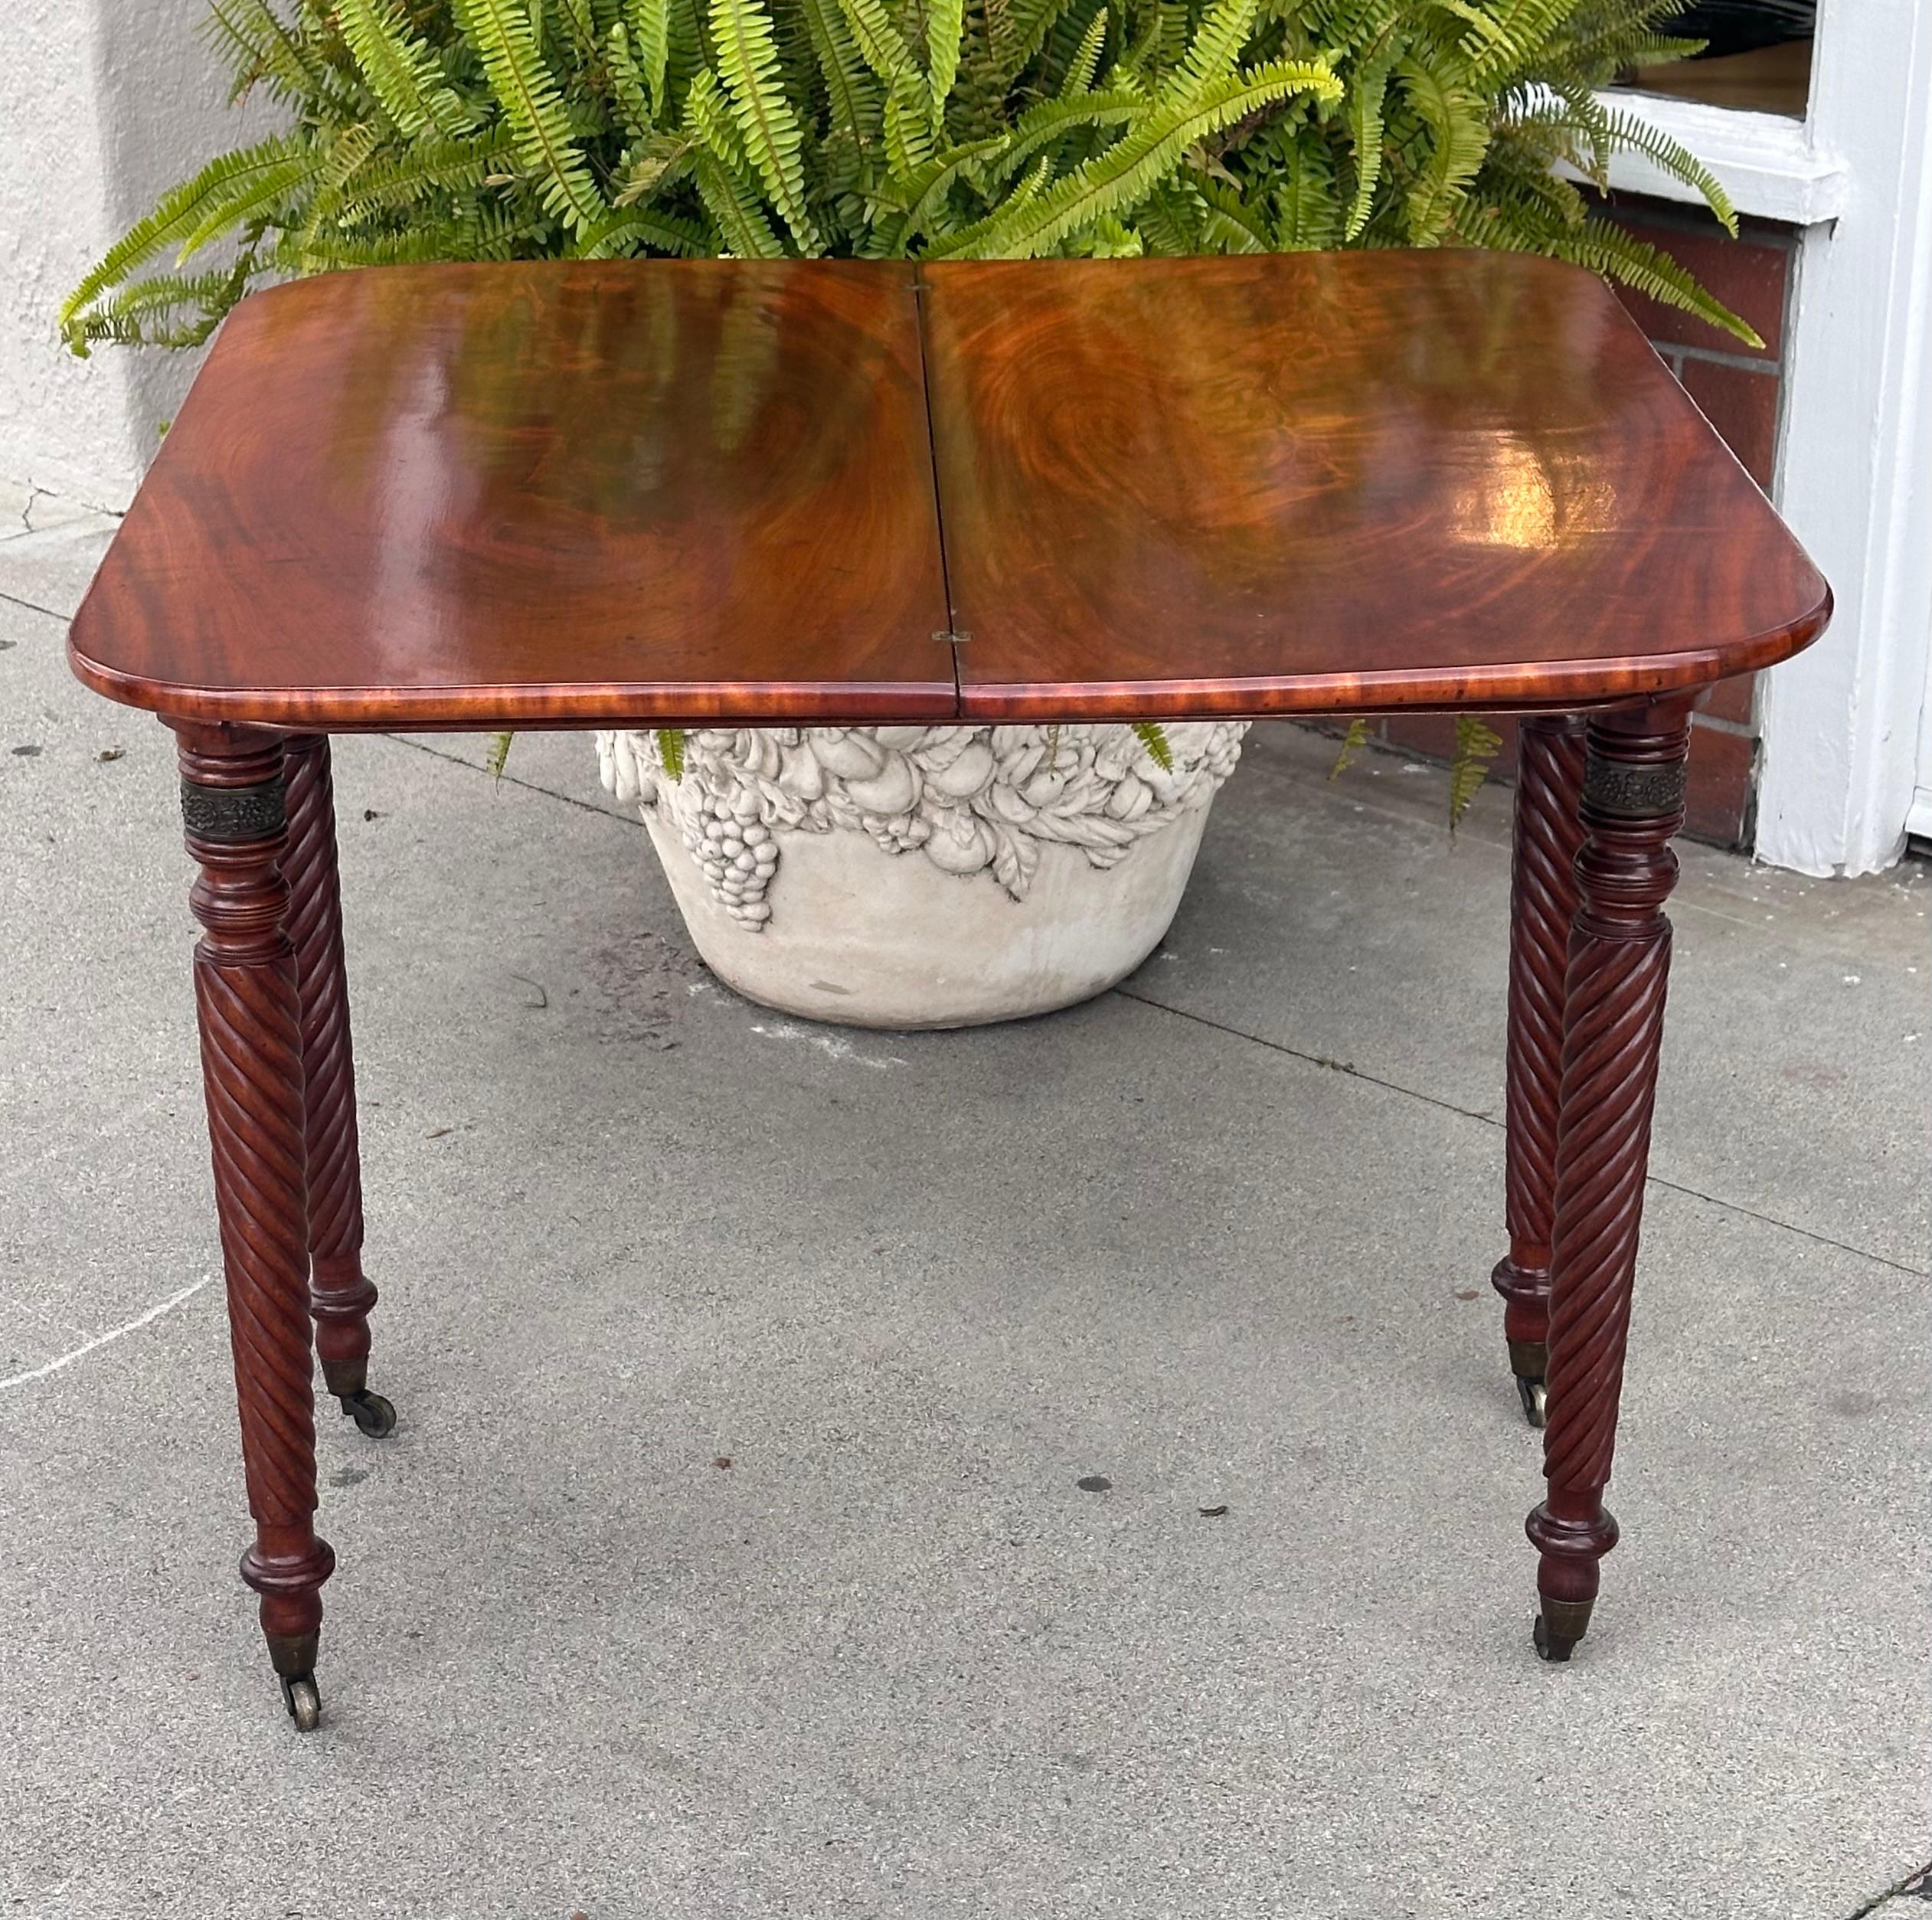 British Antique Regency Mahogany Console Flip Top Game Table For Sale